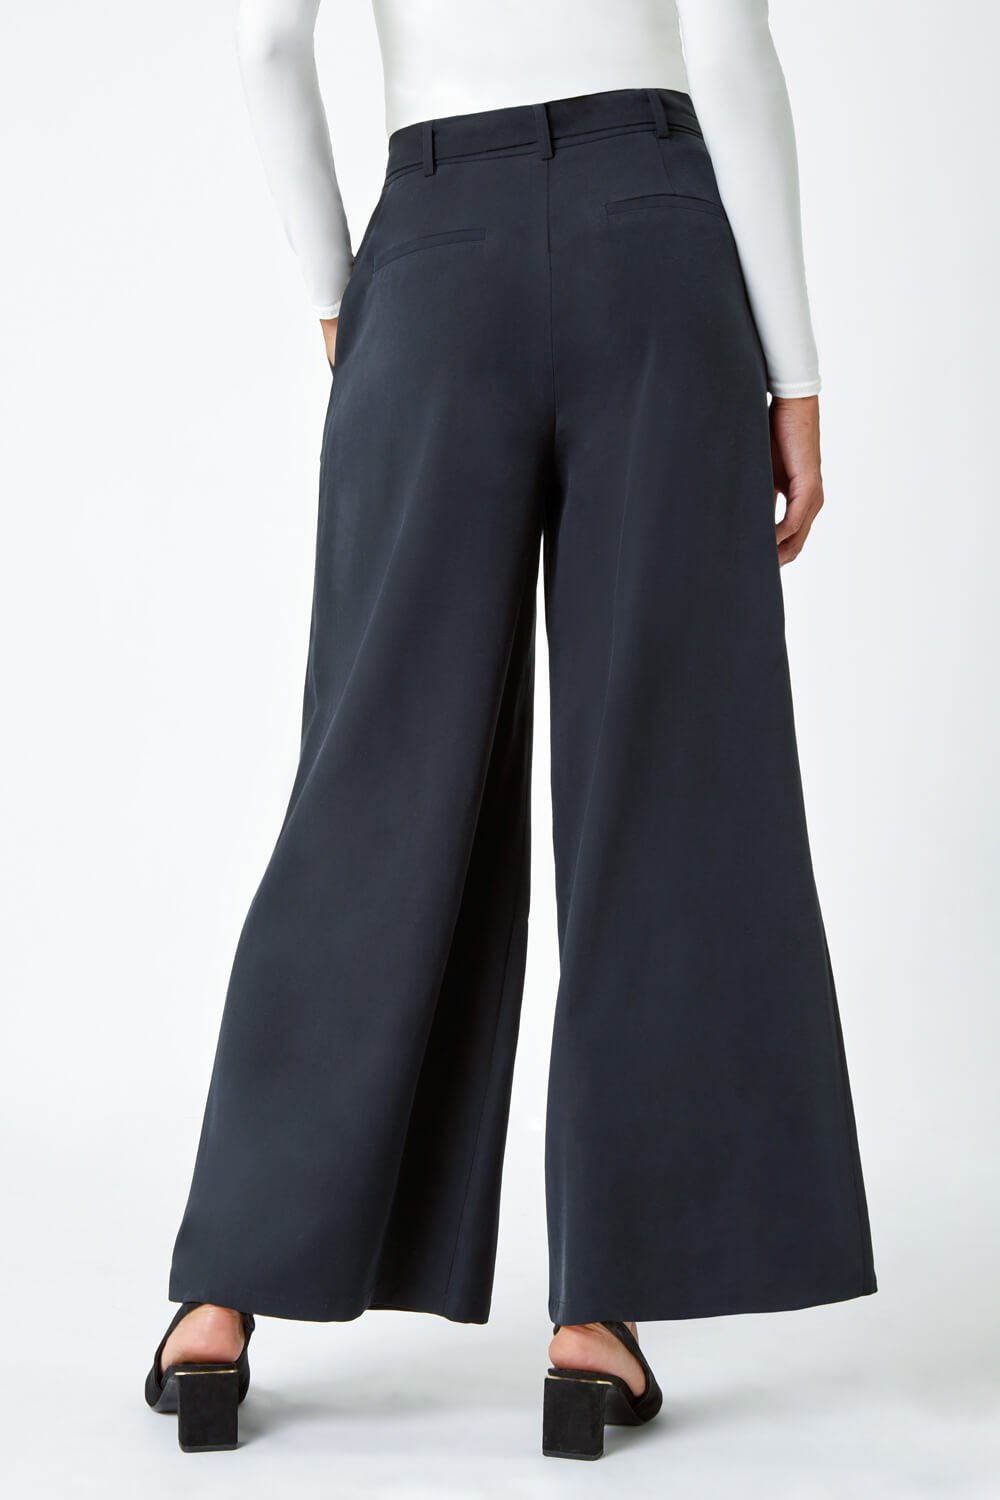 Black Wide Leg Belted Stretch Trousers, Image 3 of 5